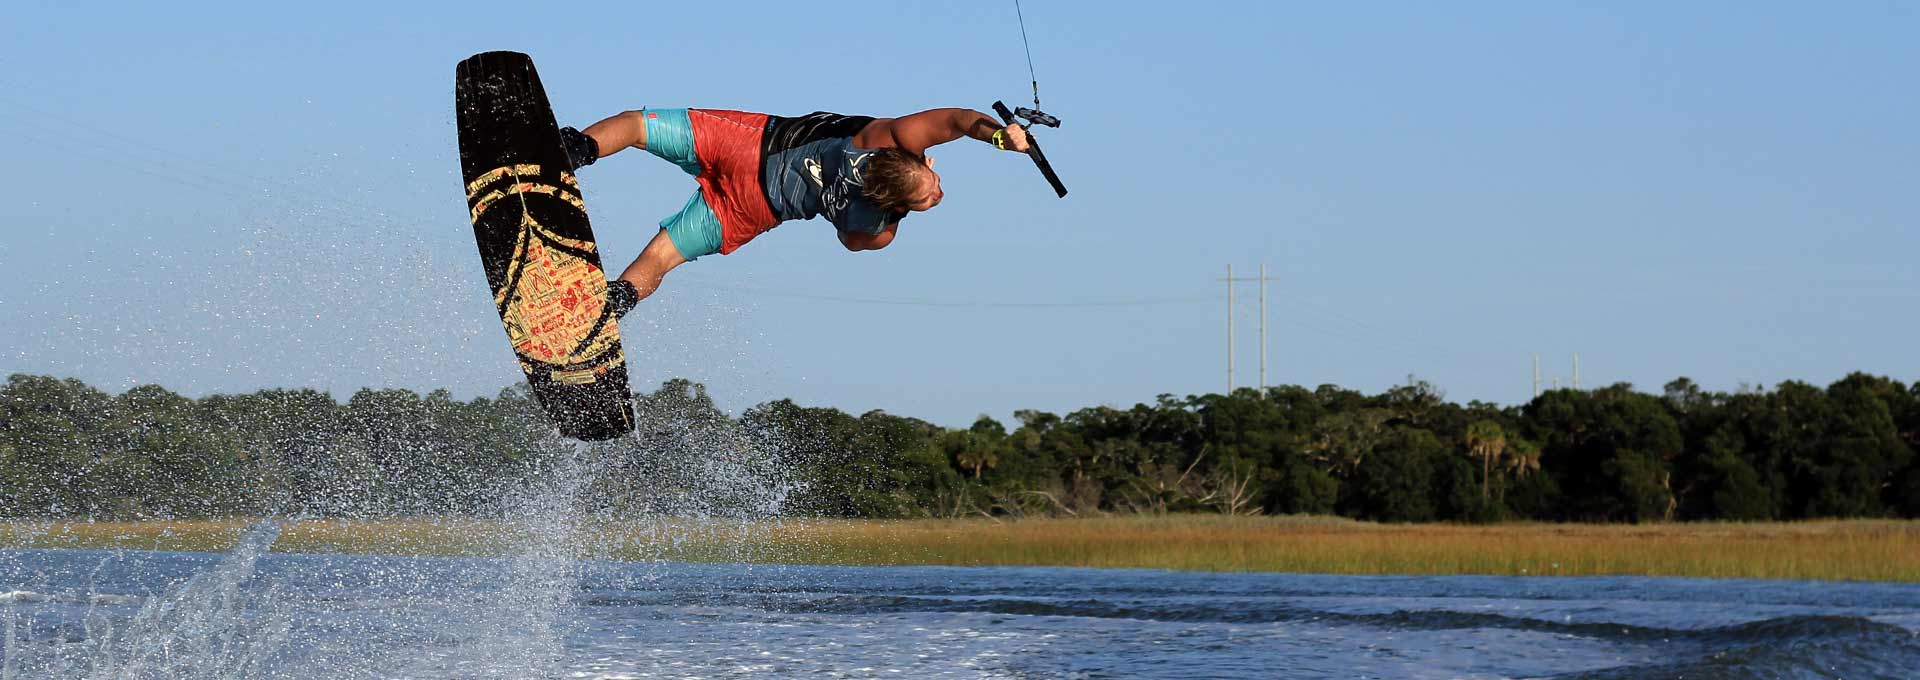 Learn How To Wakeboard. Try Wakeboarding.